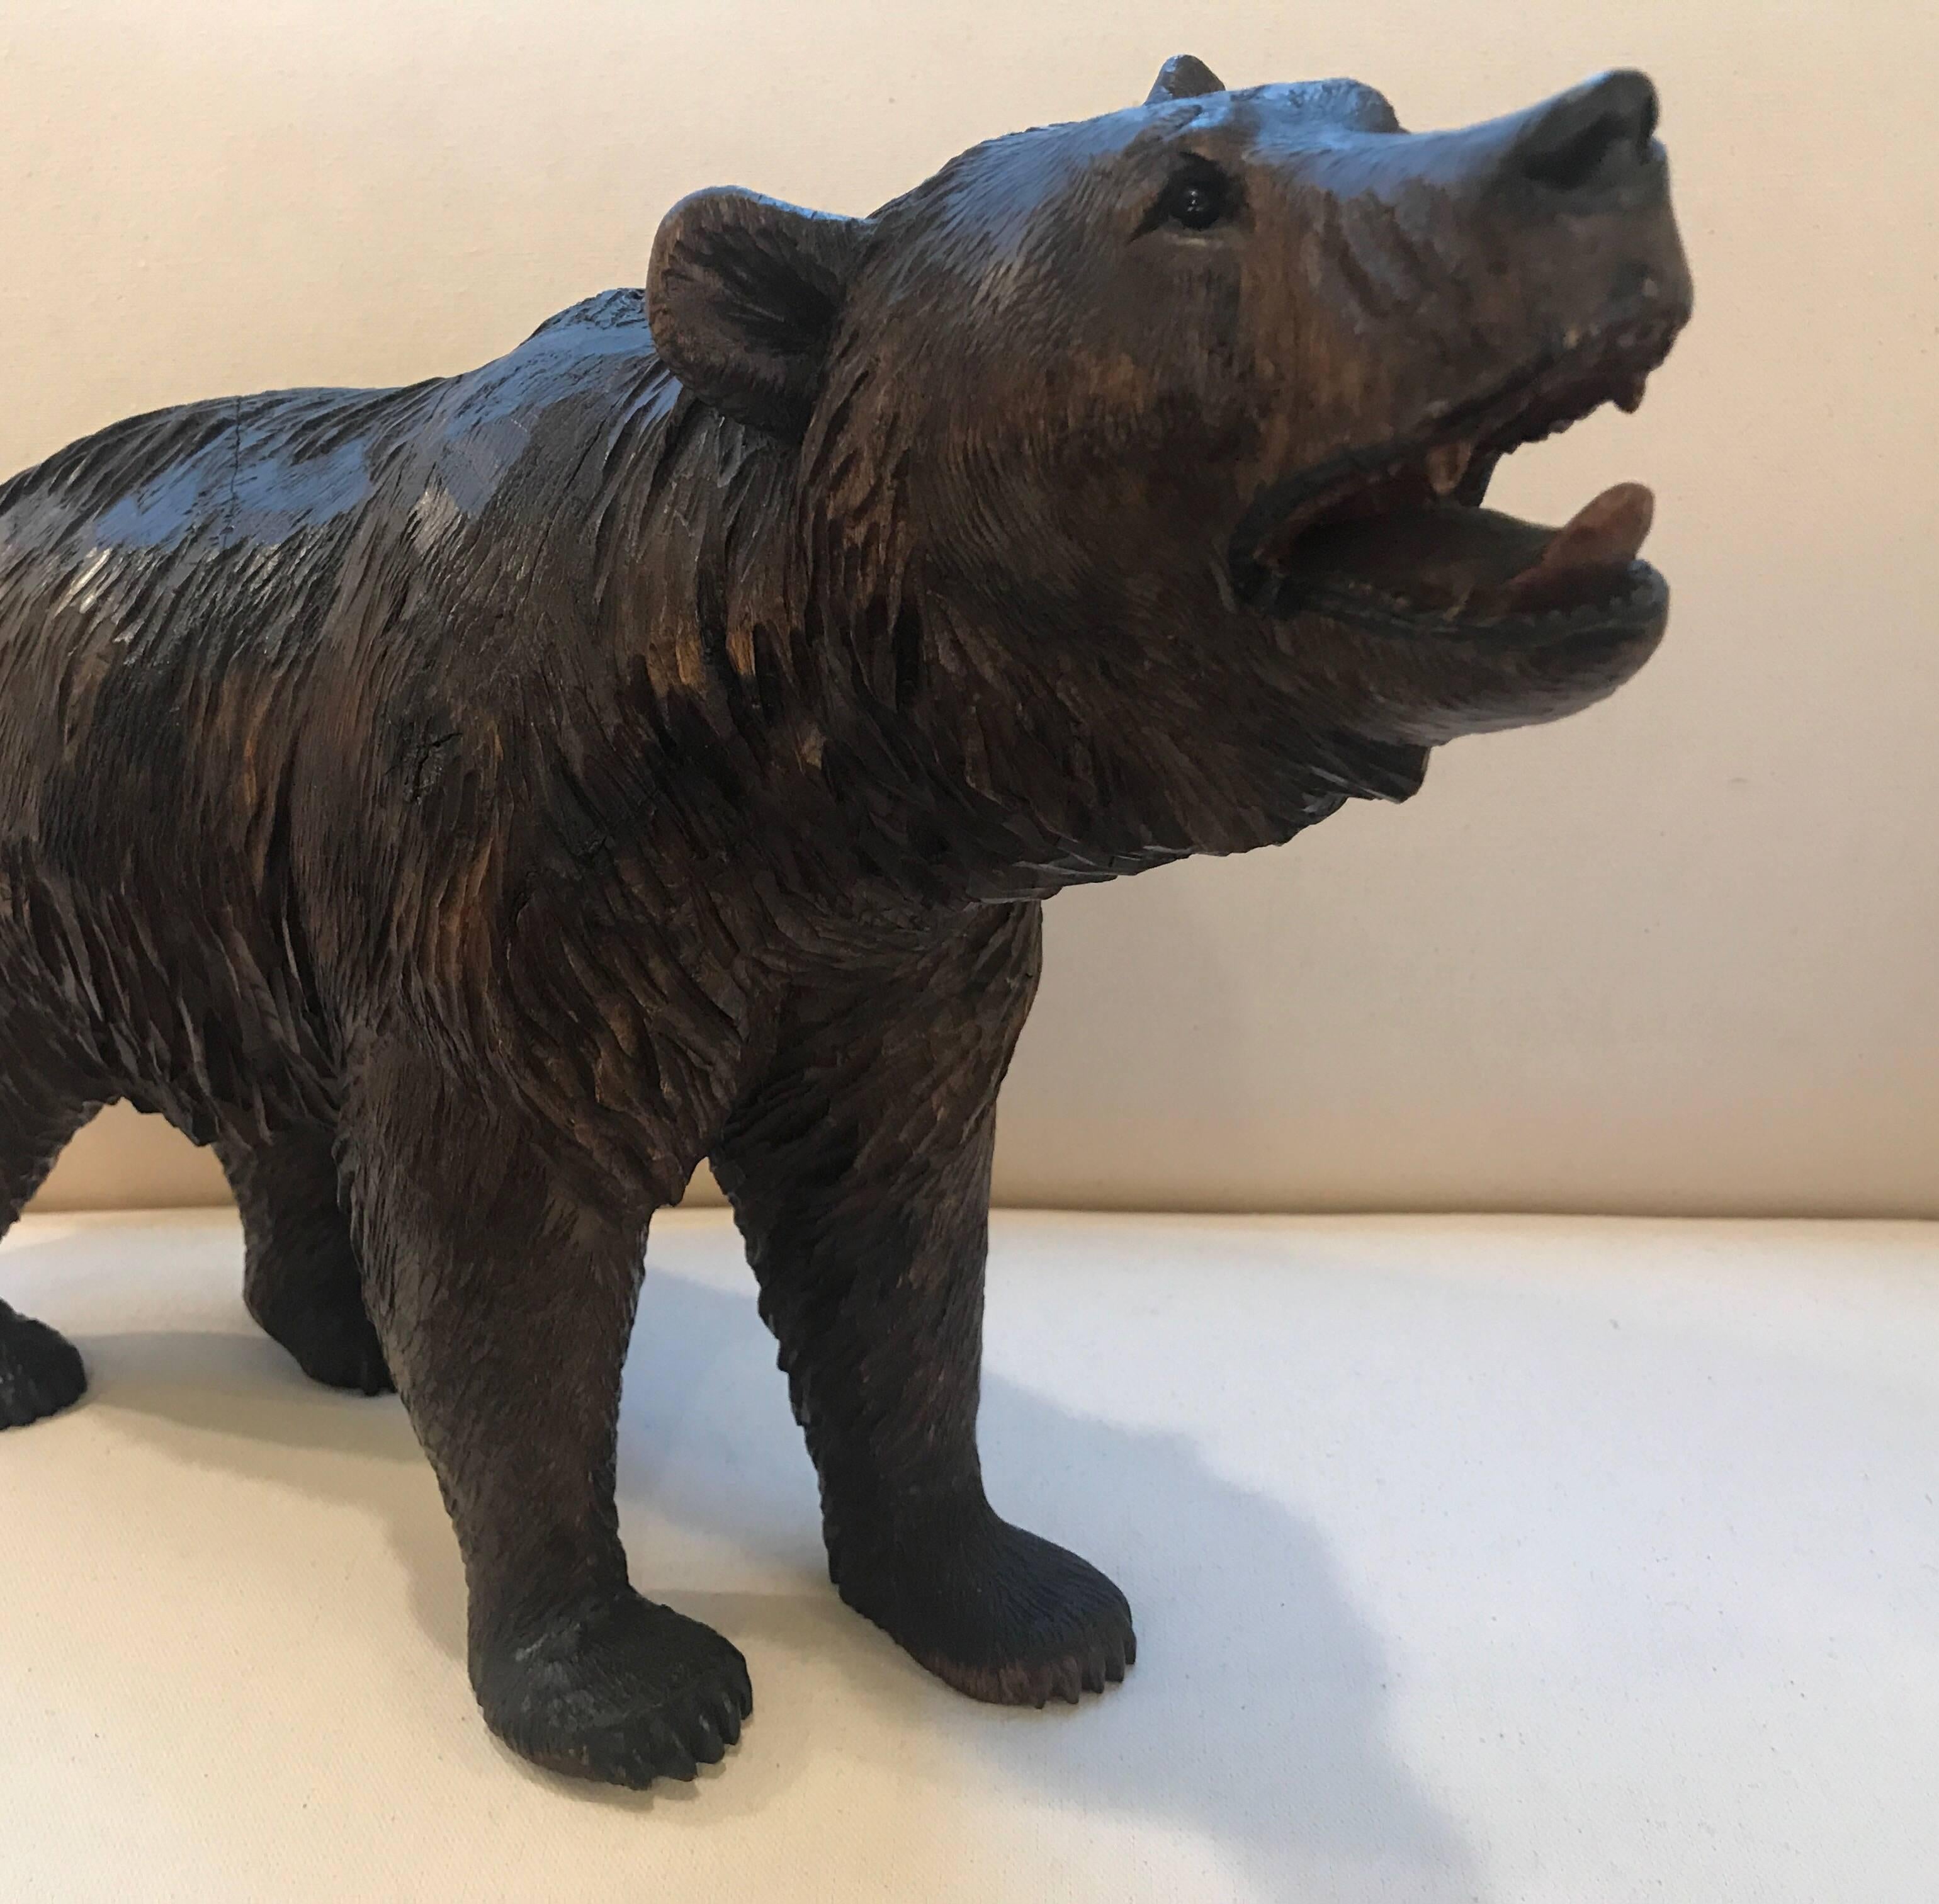 Exceptional walnut Black Forest carving of a bear. The fully hand-carved figure with glass eyes, late 19th century.
This dark wood Black Forest carving features a bear on all four legs with his head turned and mouth open. This carved bear from the